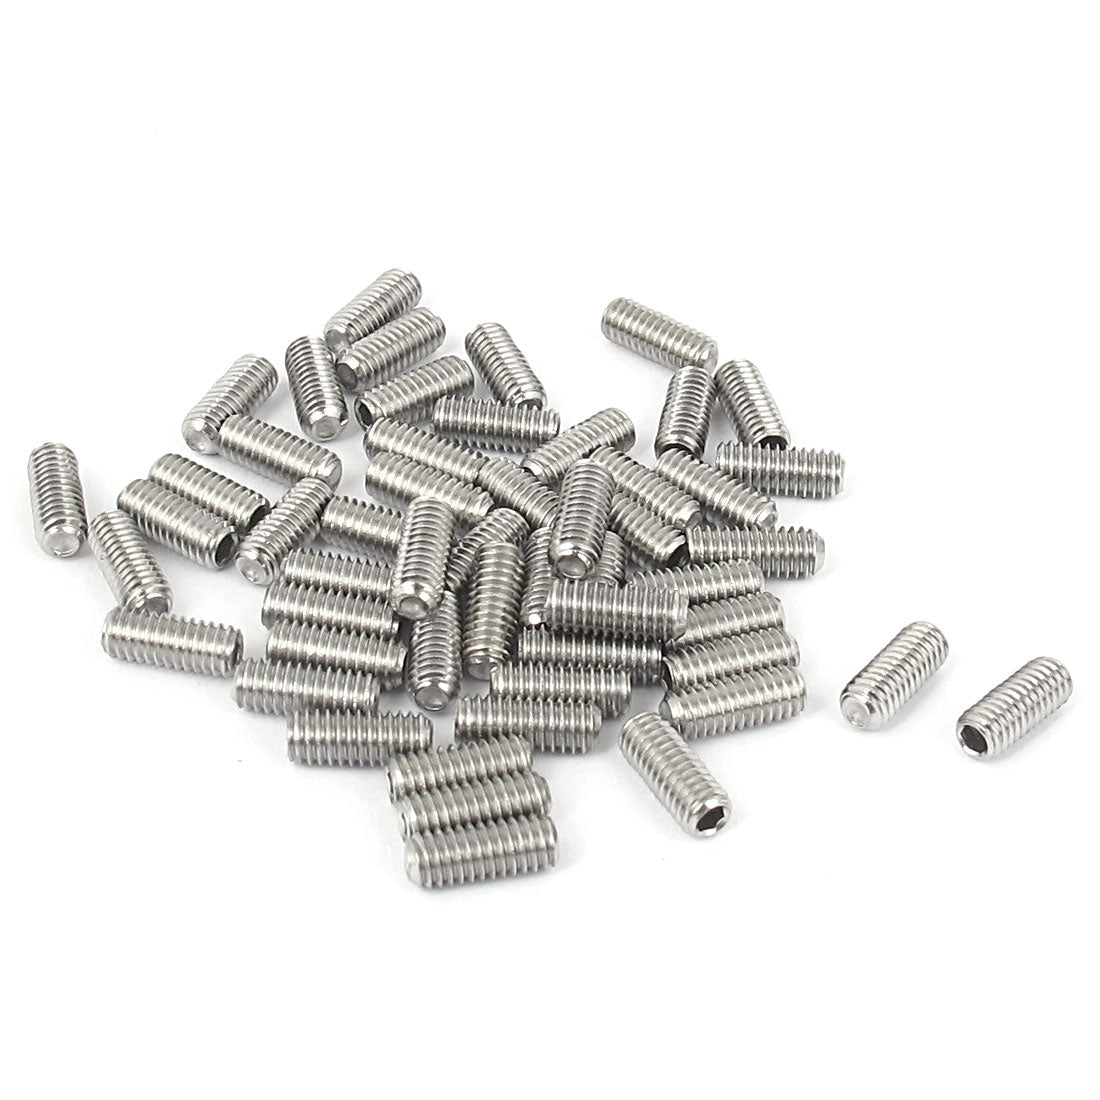 uxcell Uxcell M4x10mm Stainless Steel Hex Socket Set Cup Point Grub Screws Silver Tone 50pcs